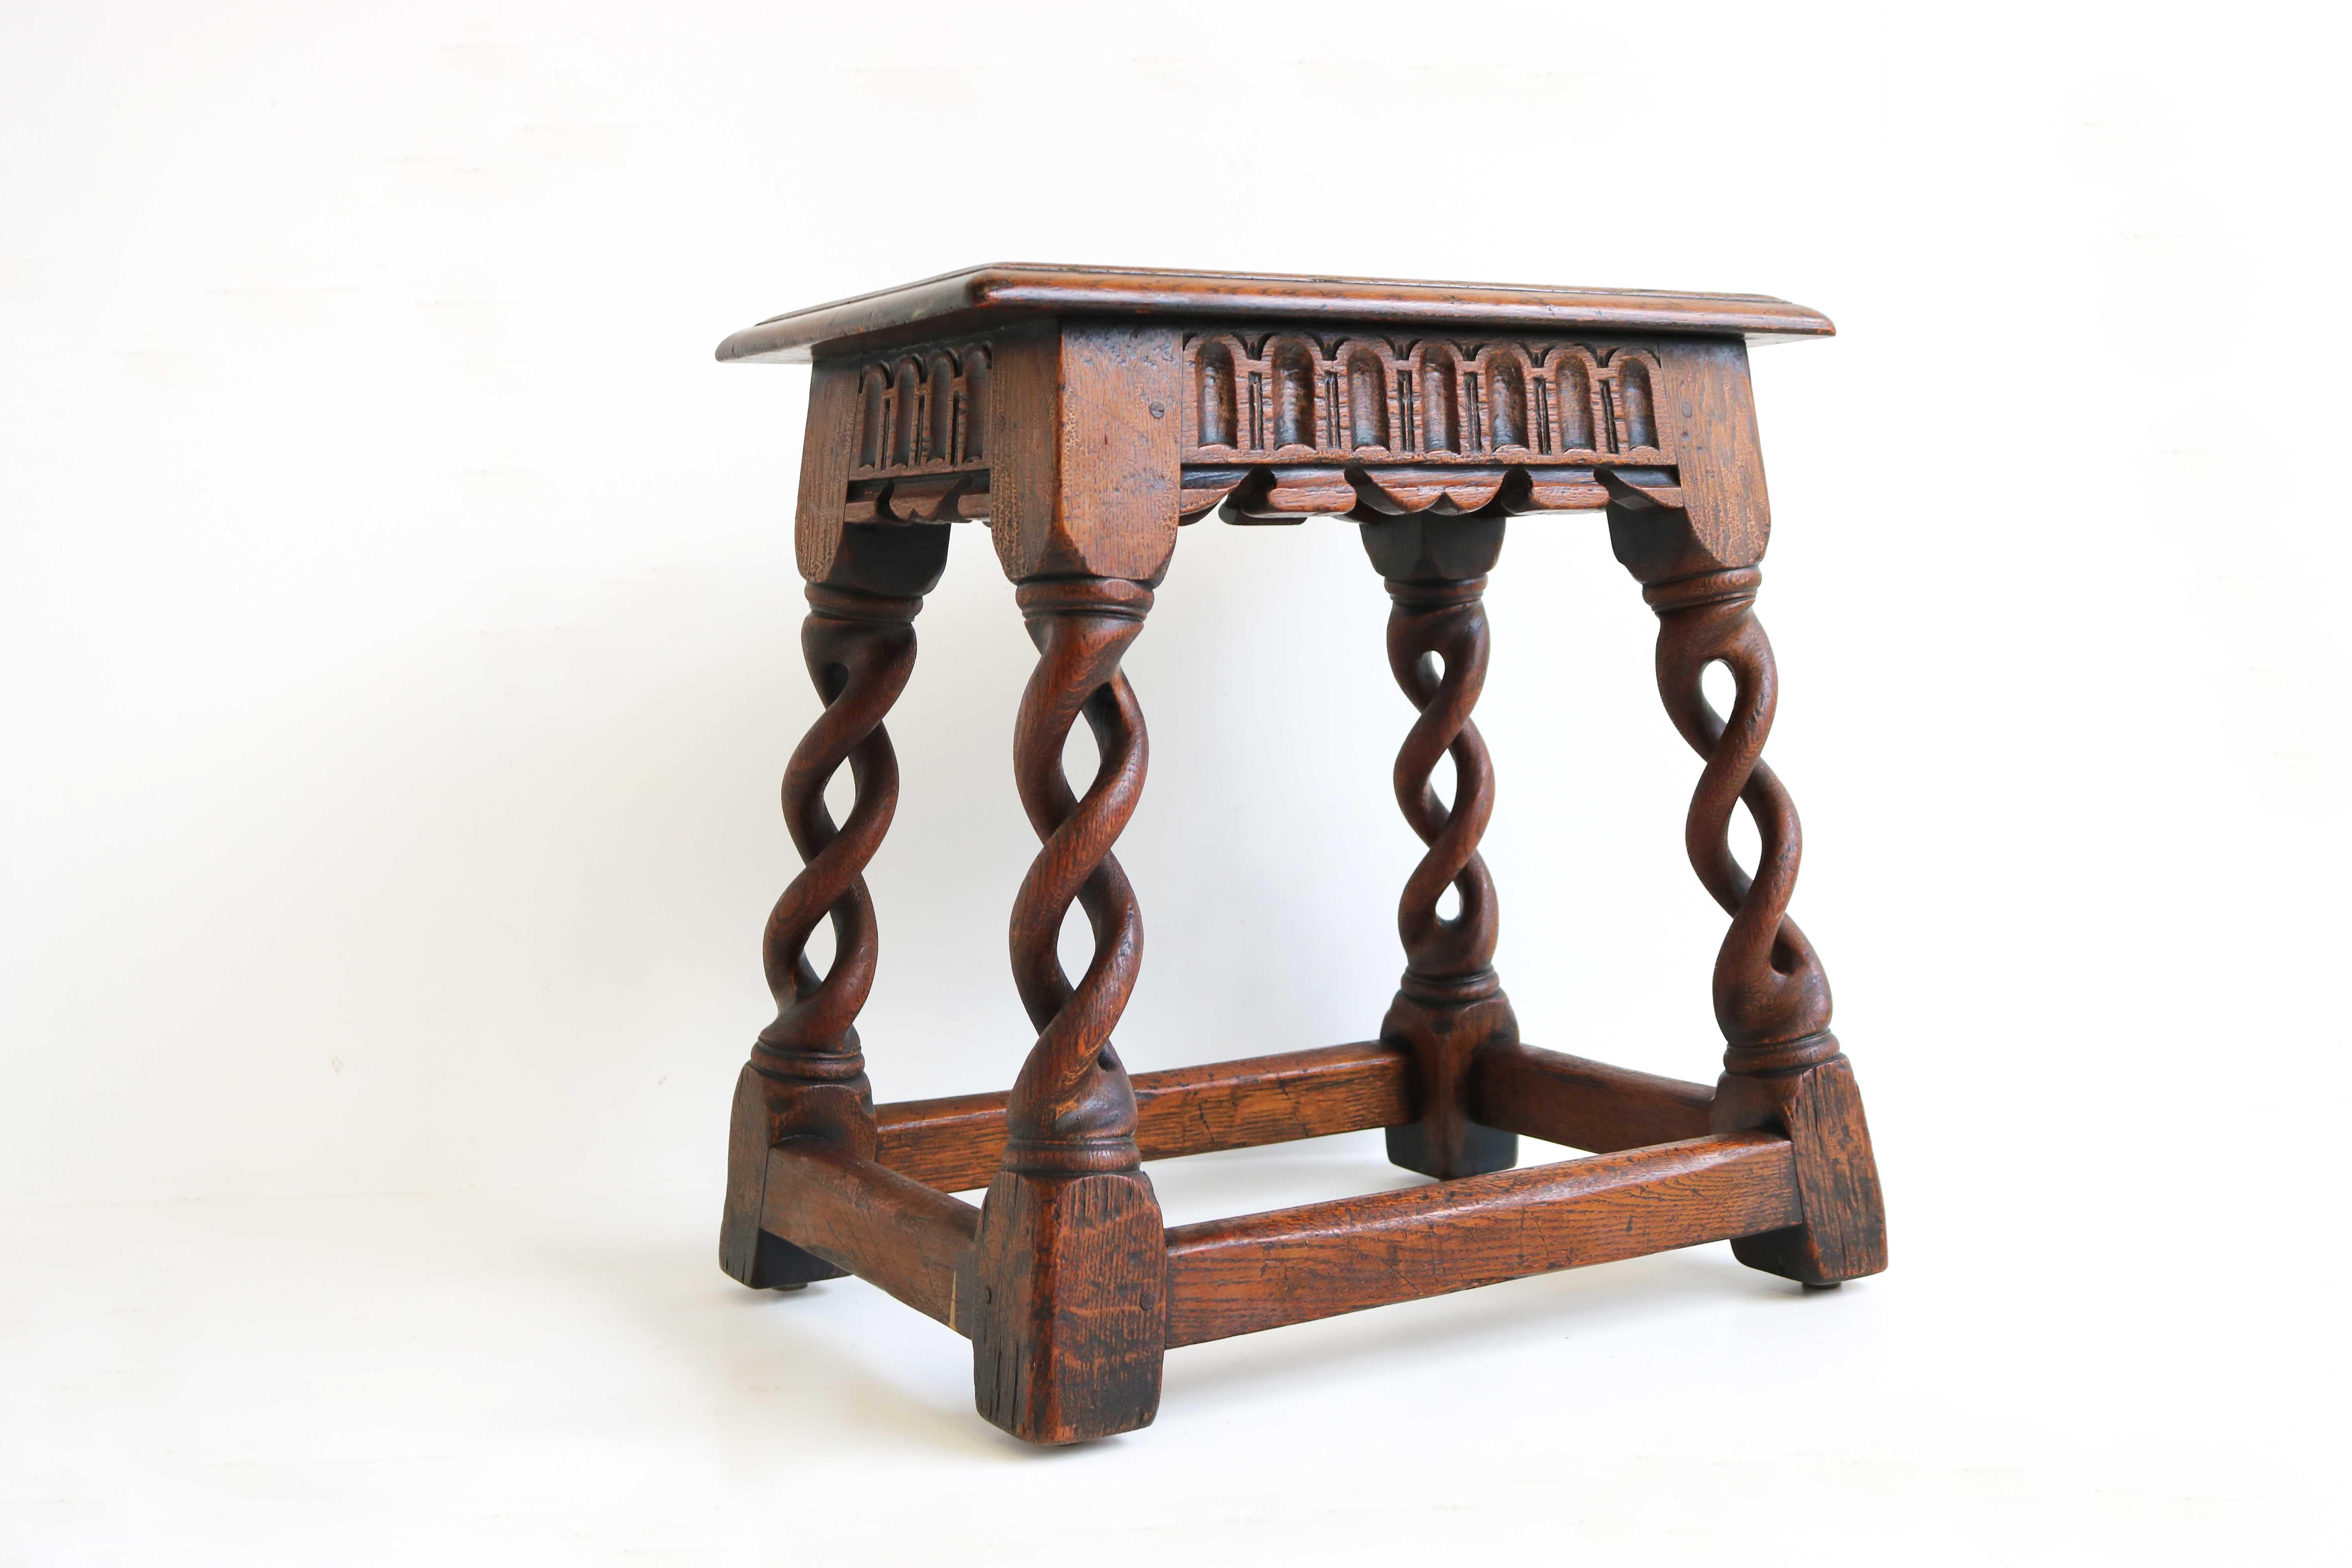 Antique rare Country English open barley twist splaying legs hand carved oak joint stool jacobean revival end table.
A stunning hand carved English joint stool from the late 19th century. This stool features a rectangular beveled edge top.